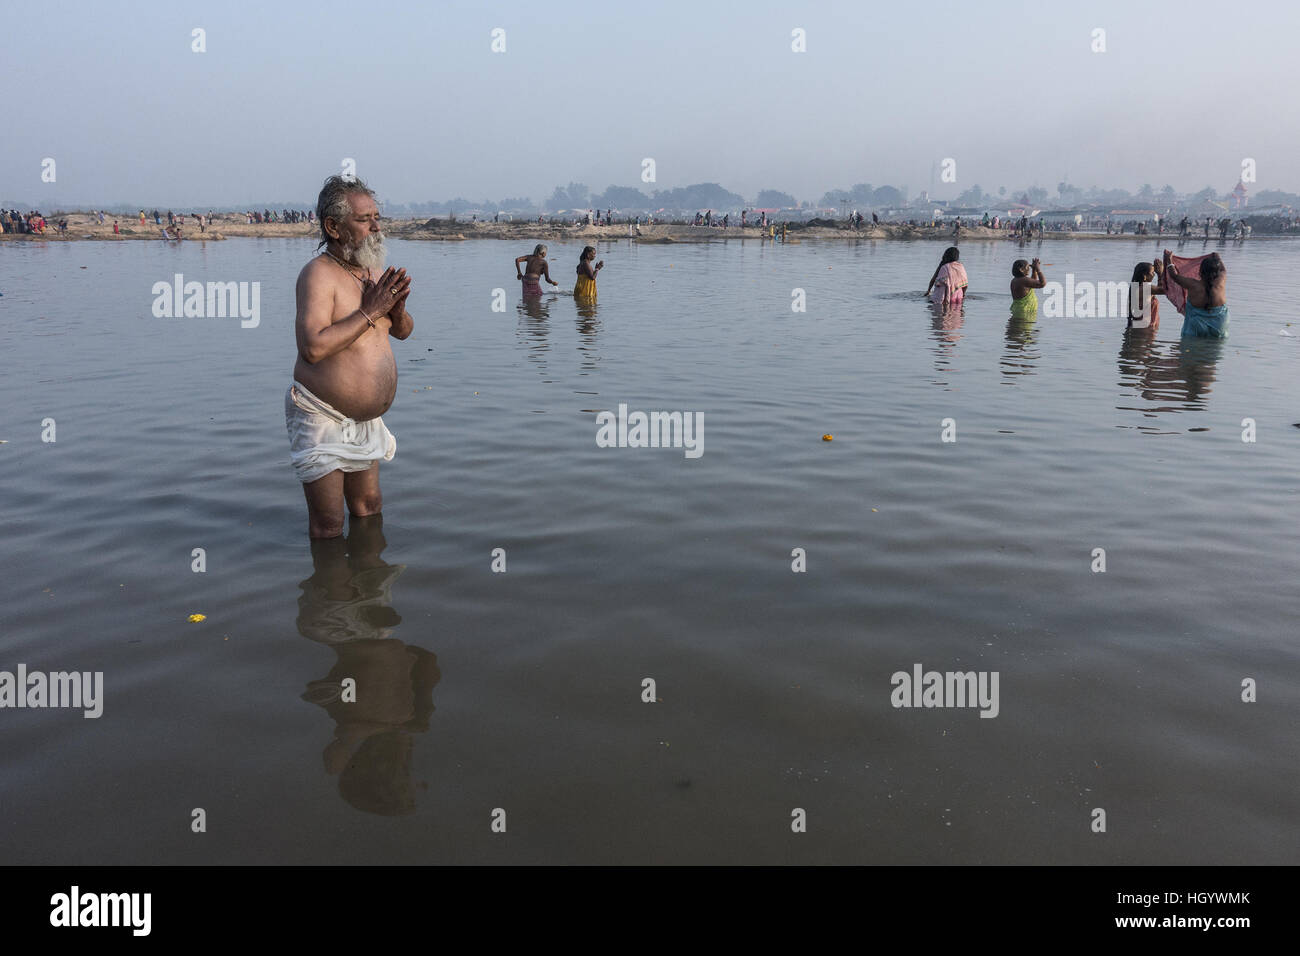 Kolkata, Indian state West Bengal. 14th Jan, 2017. Indian Hindu devotees take a holy dip in the Ajay river near the Joydev Fair, some 200km away from Kolkata, capital of eastern Indian state West Bengal, Jan. 14, 2017. A large number of Hindu pilgrims converge for the Joydev Fair on the occasion of Makar Sankranti, a holy day of the Hindu calendar, during which taking a dip is considered to be of great religious significance. © Tumpa Mondal/Xinhua/Alamy Live News Stock Photo